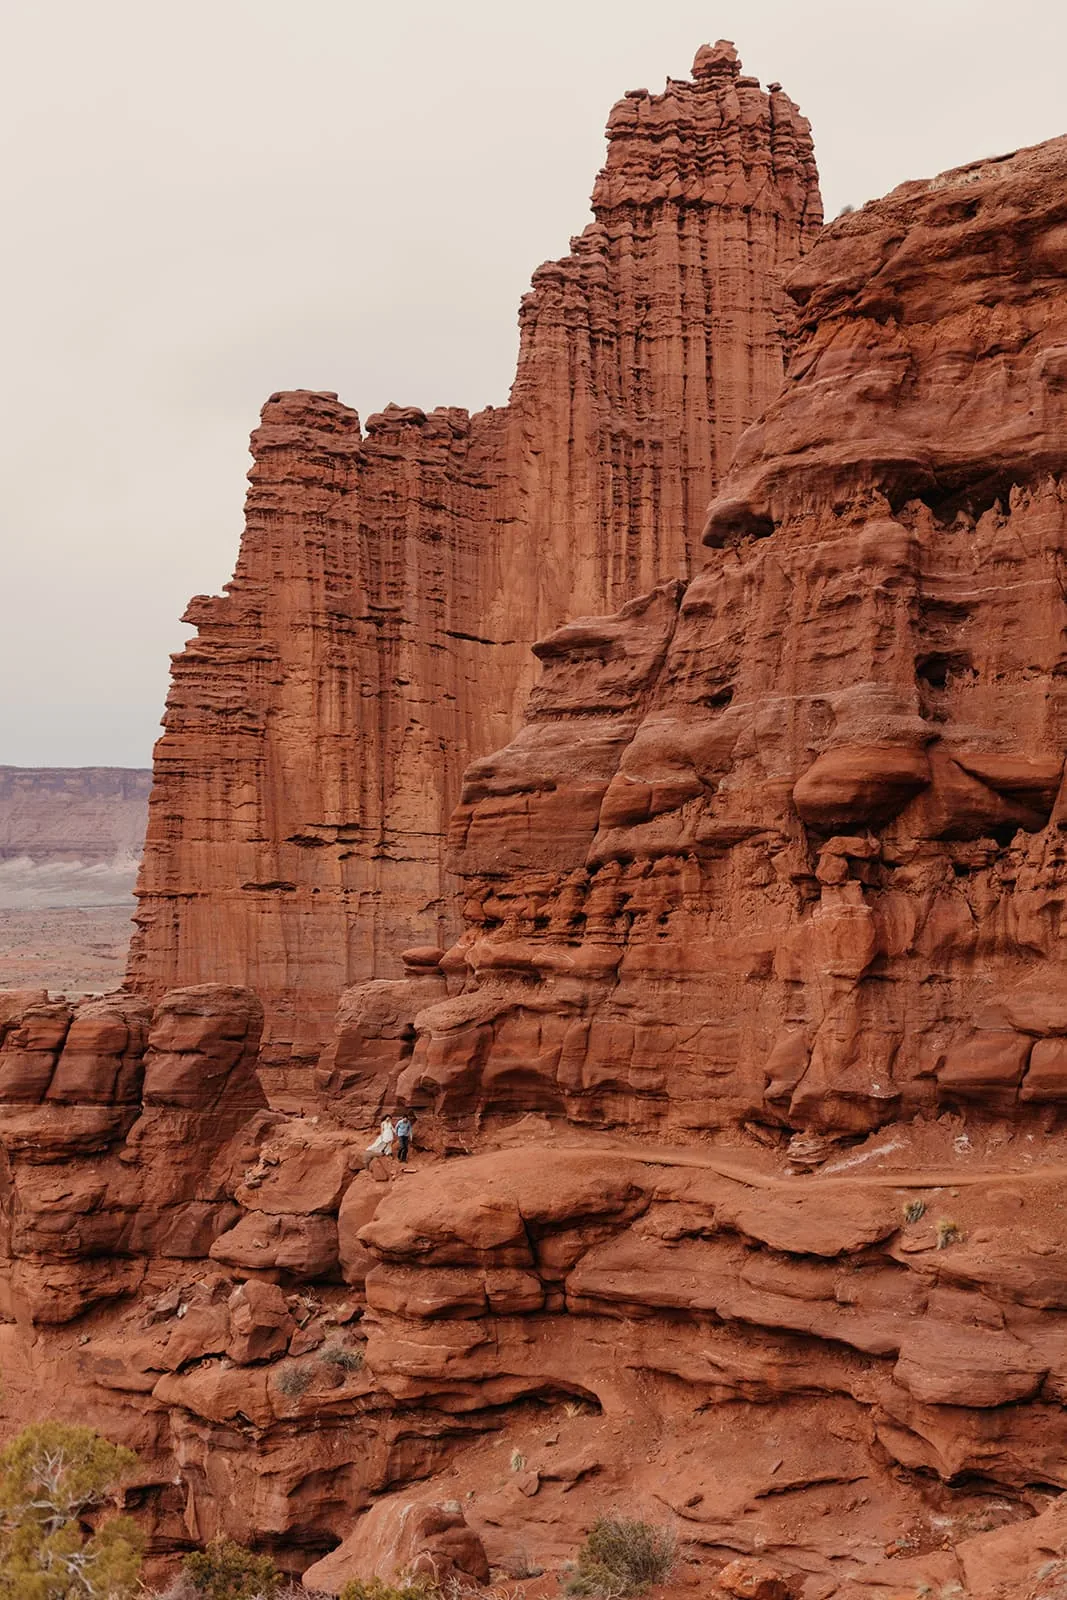 A couple walks together in the Fisher Towers area near Moab Utah